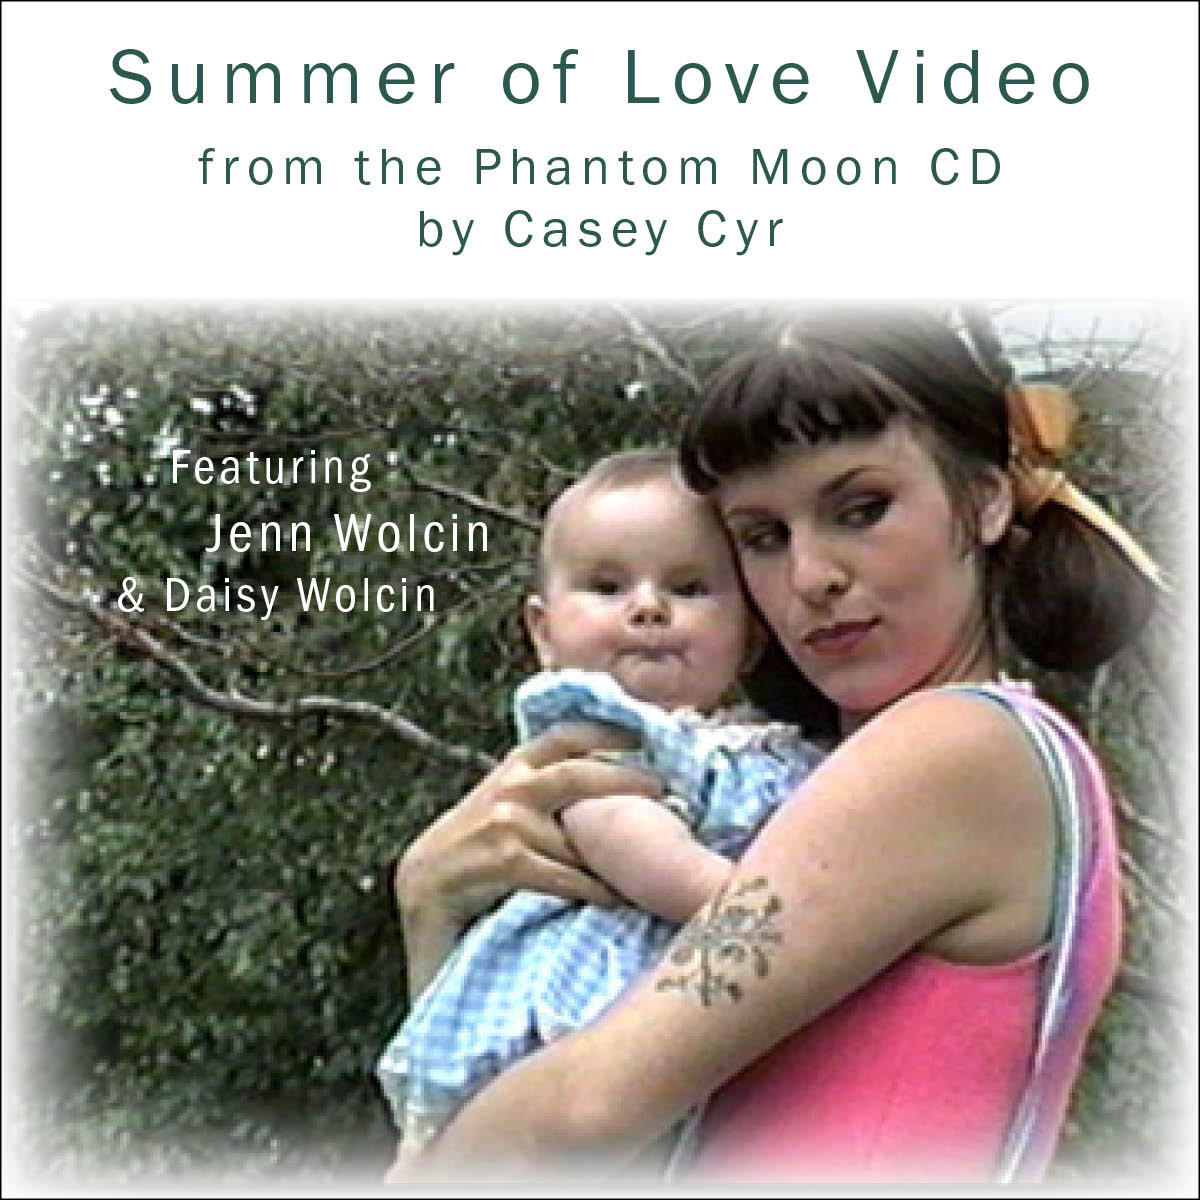 Summer of Love Video from the Summer of Love Track on Phantom Moon by Casey Cyr - featuring Jenn Wolcin